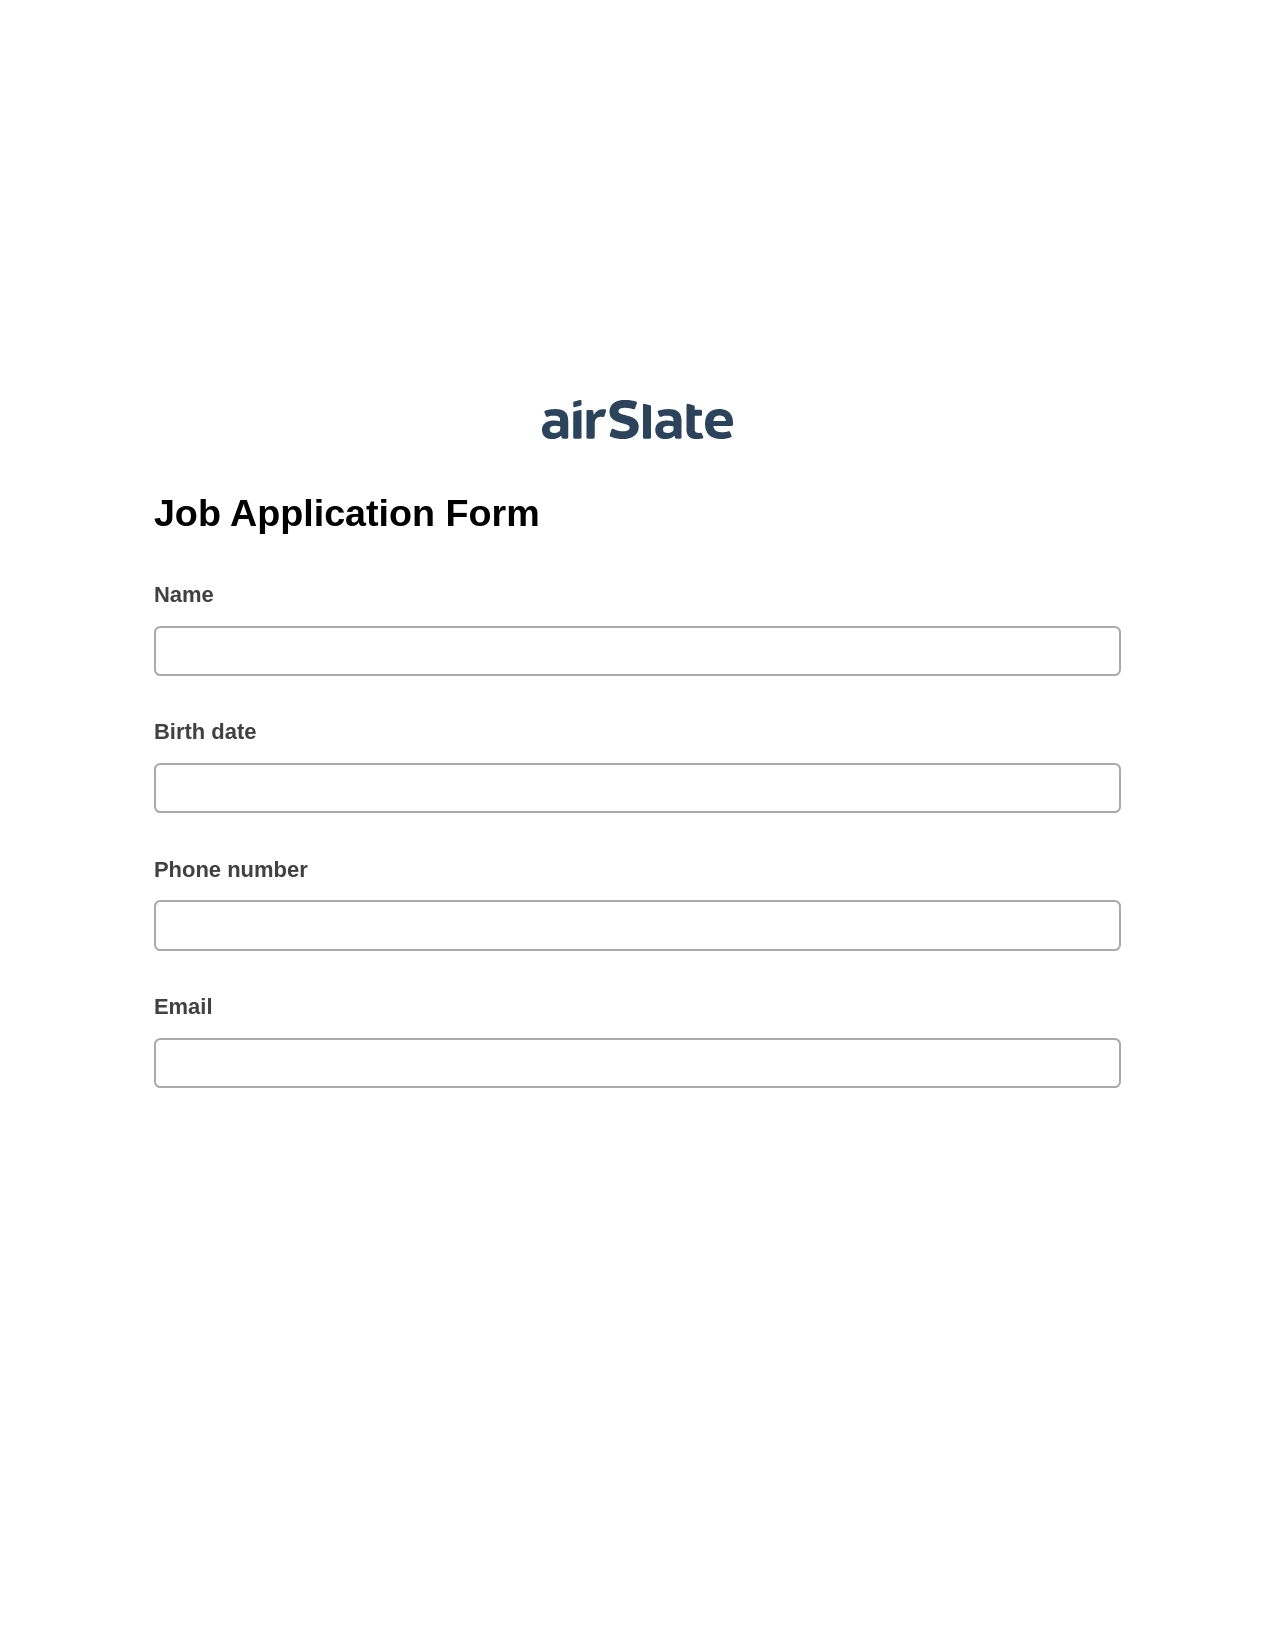 Multirole Job Application Form Pre-fill from Office 365 Excel Bot, Create MS Dynamics 365 Records Bot, Post-finish Document Bot